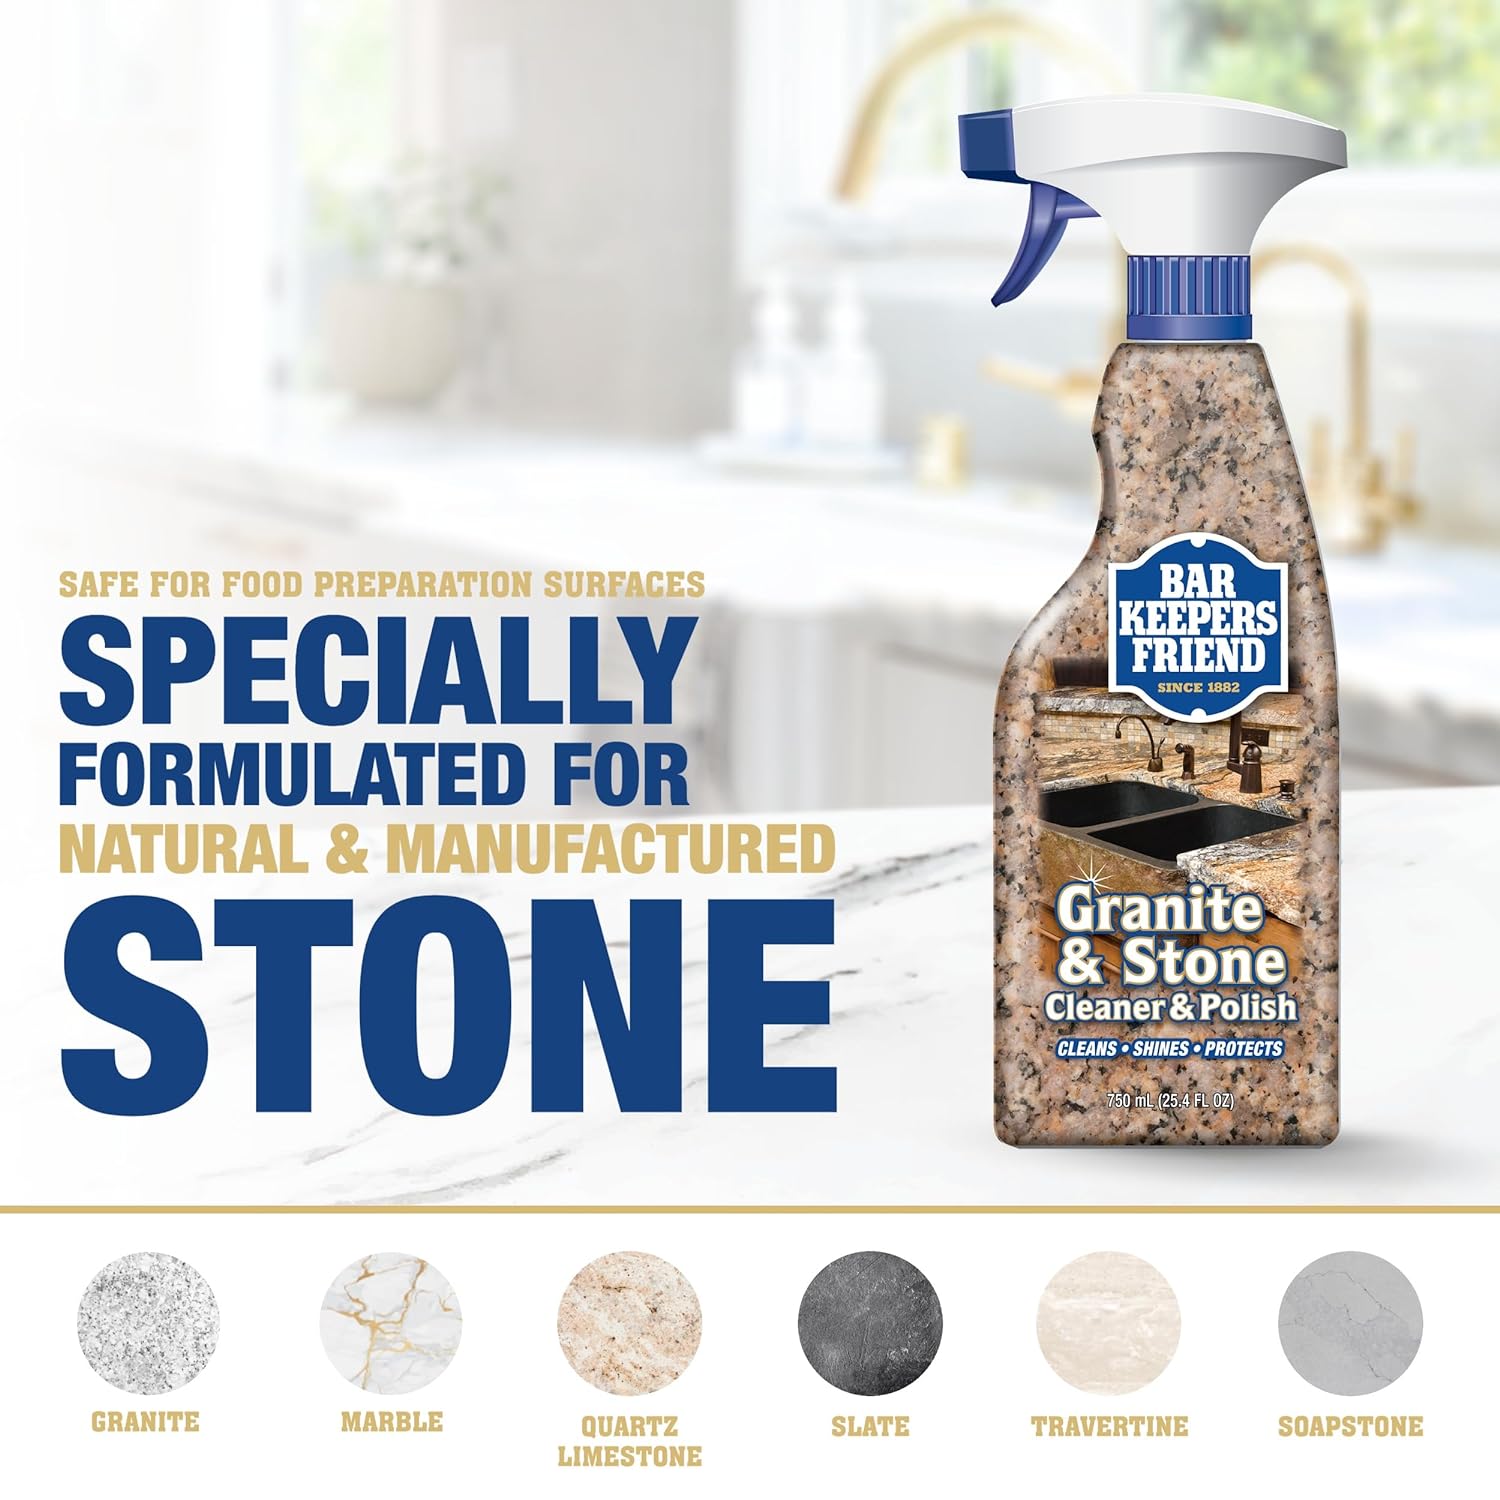 Bar Keepers Friend Granite & Stone Cleaner & Polish (25.4 oz) Granite Cleaner for Use on Natural, Manufactured & Polished Stone, Quartz, Silestone, Soapstone, Marble - Countertop Cleaner & Polish (1) : Health & Household